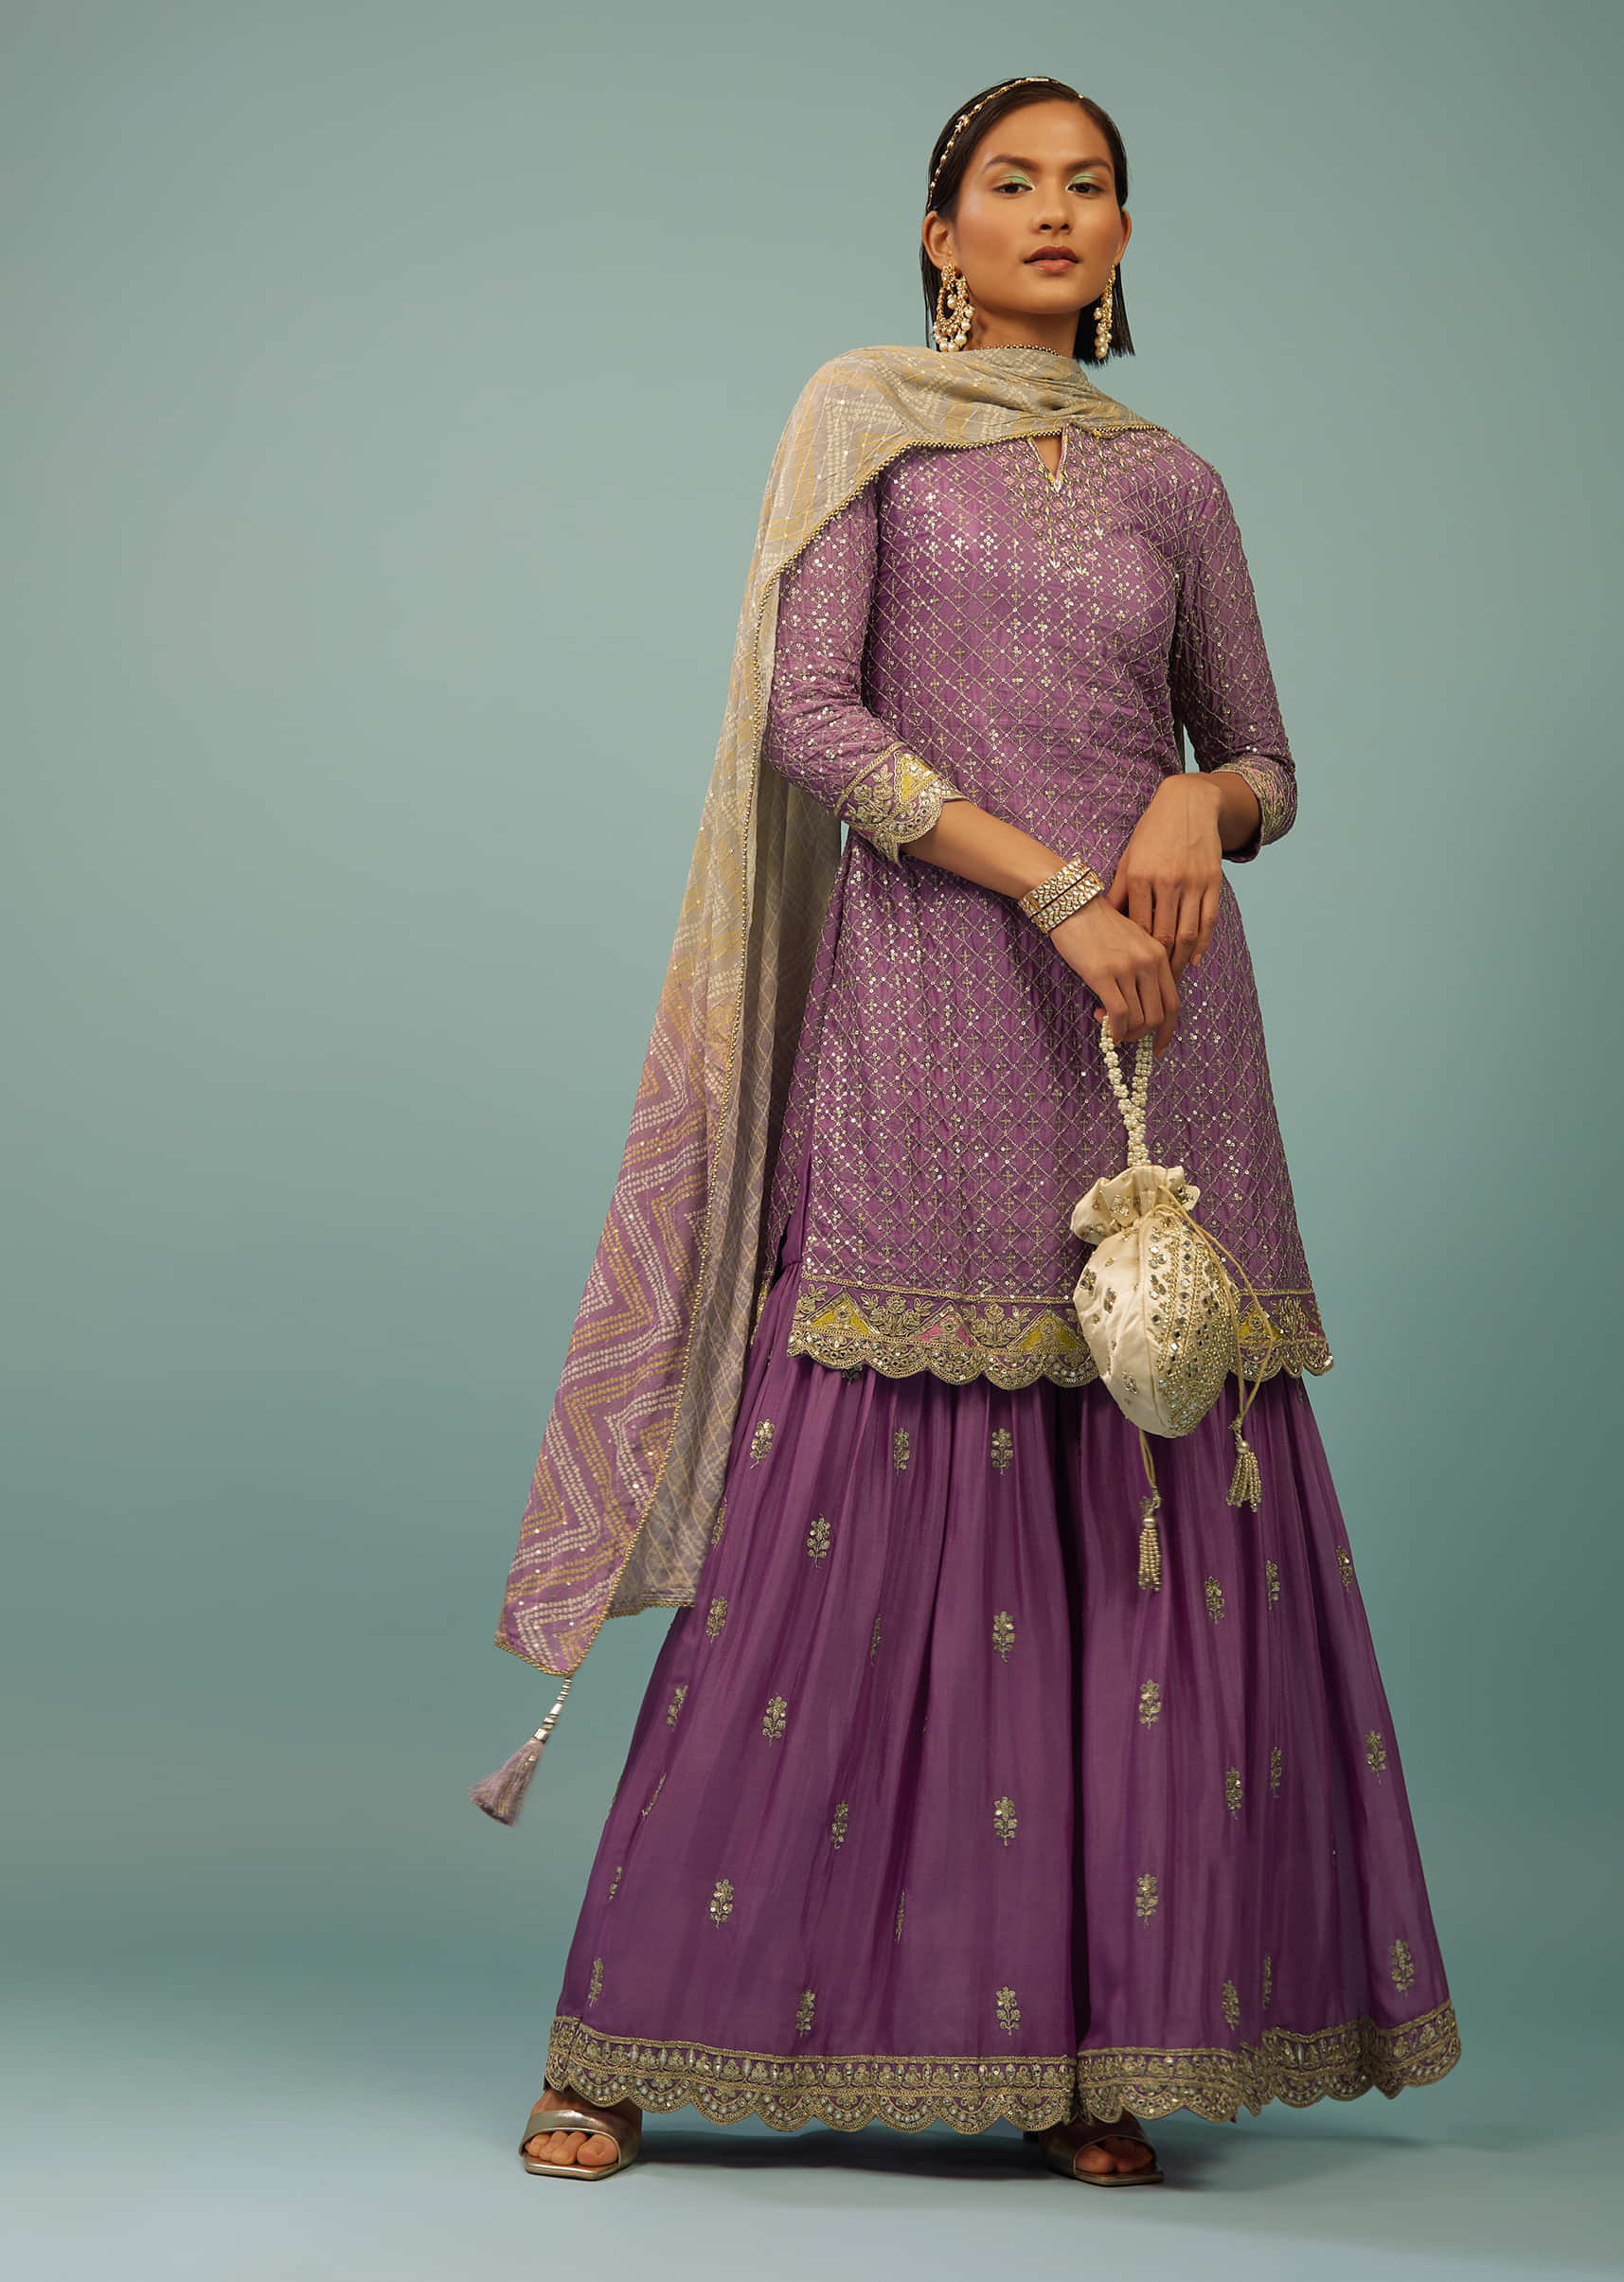 Kalki Dusty Lavender Purple Sharara Suit With Embroidery And Bandhani Dupatta